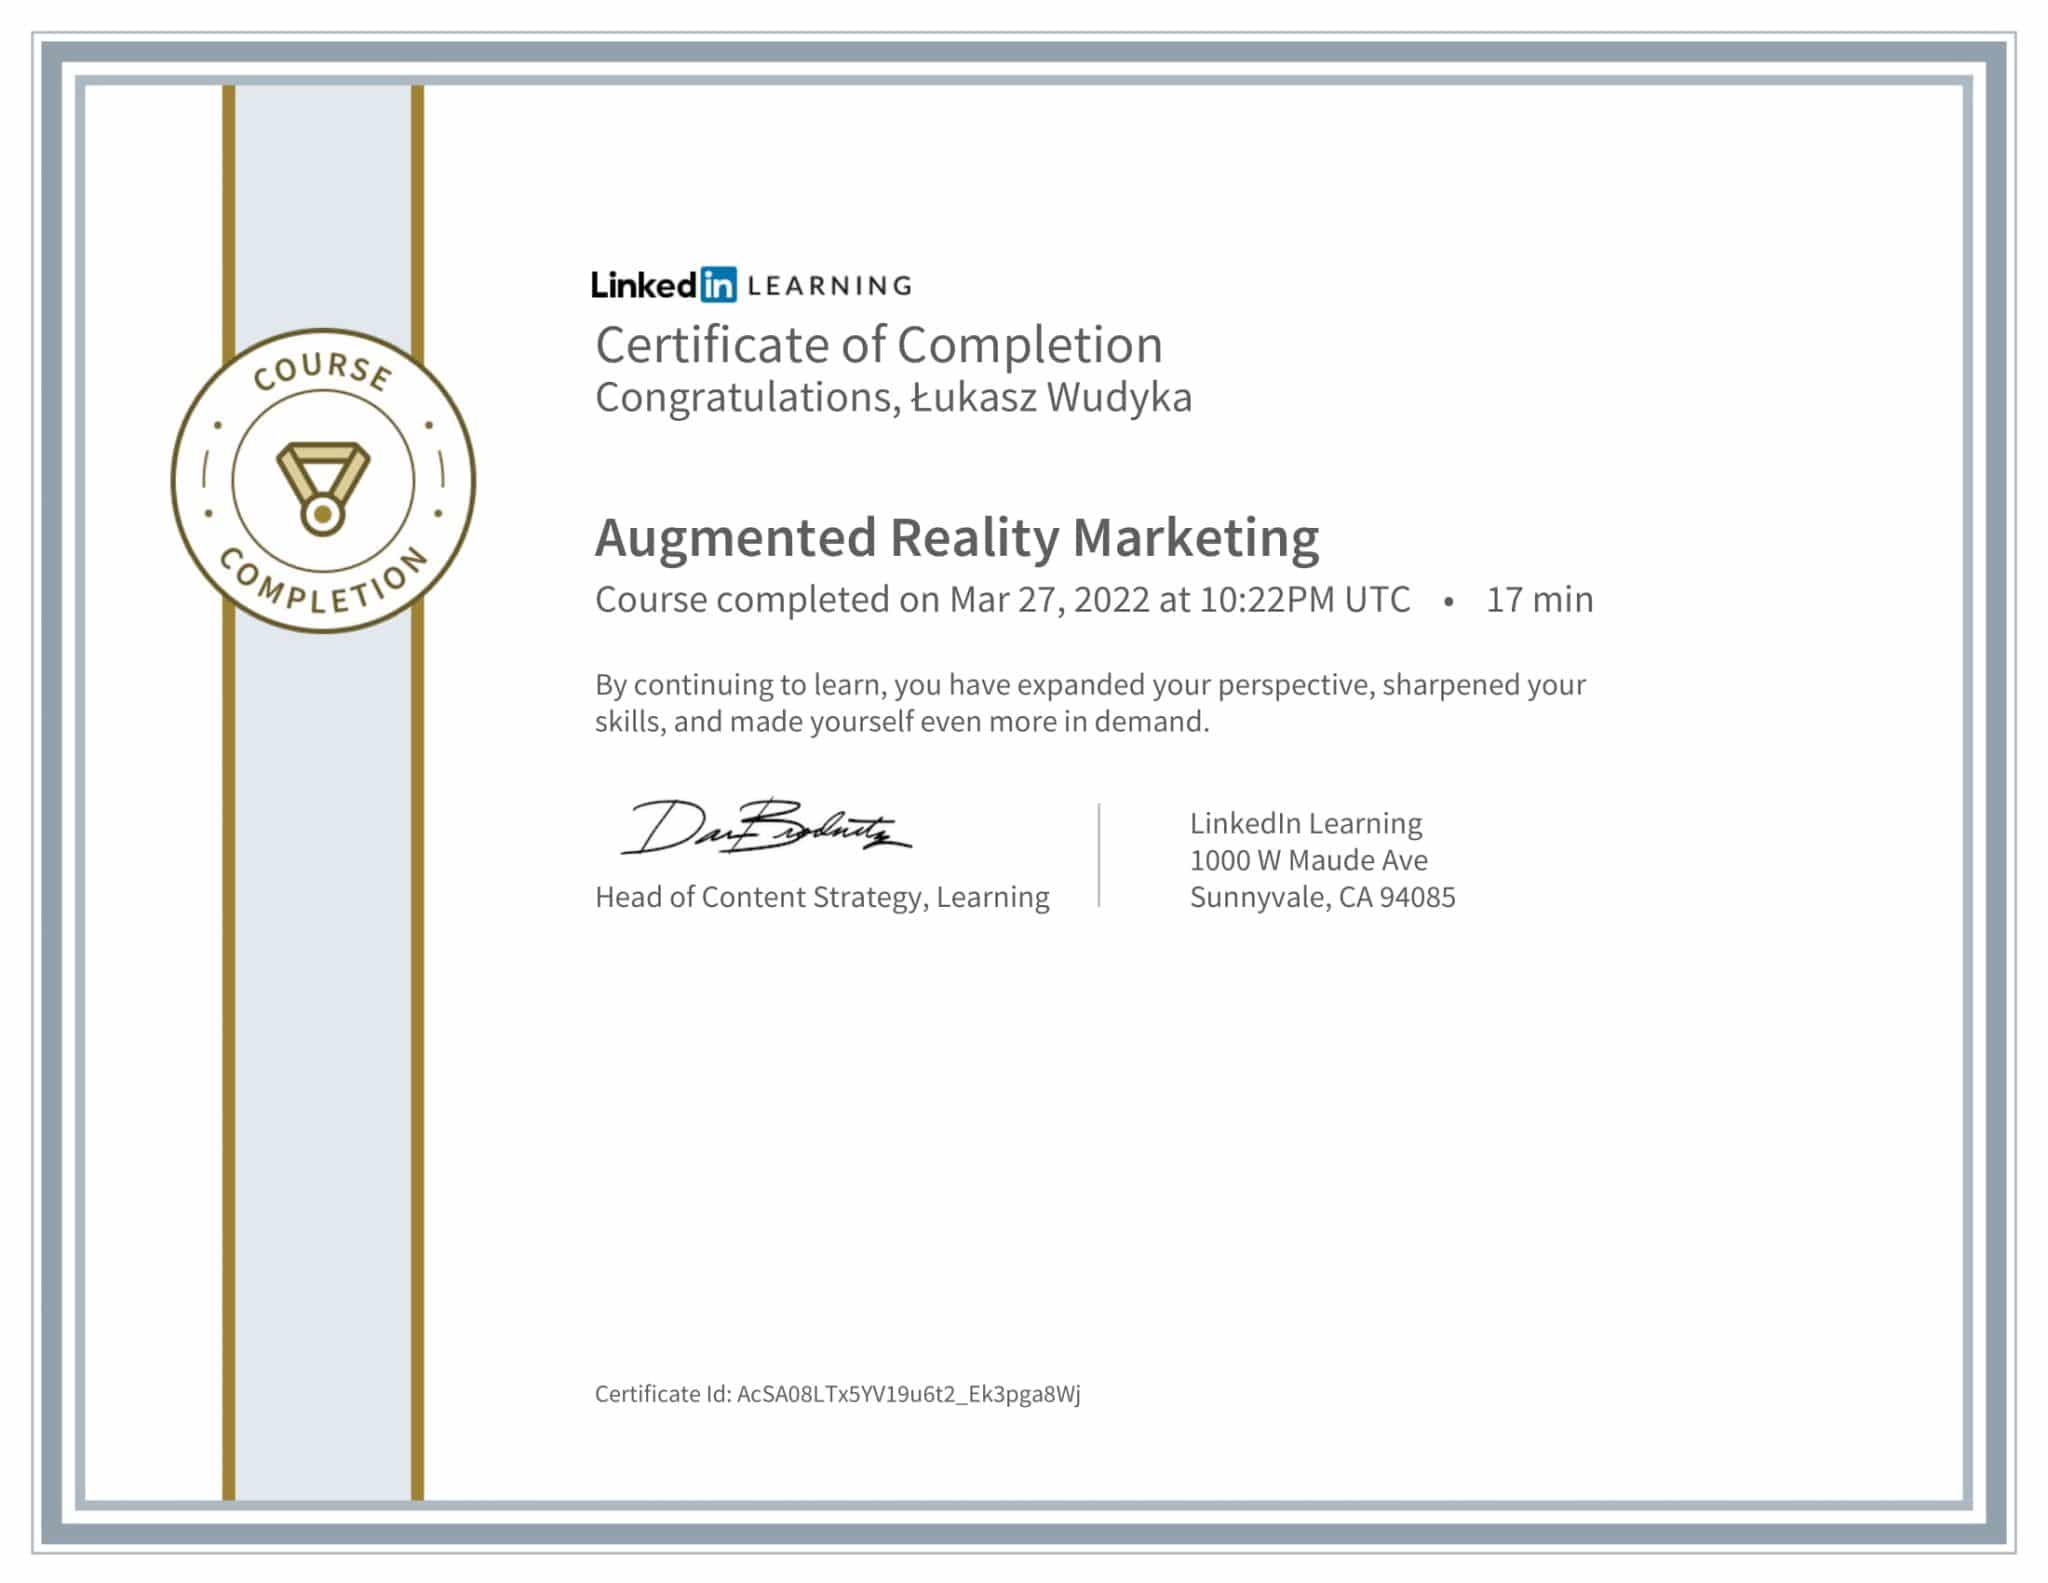 CertificateOfCompletion_Augmented Reality Marketing-1